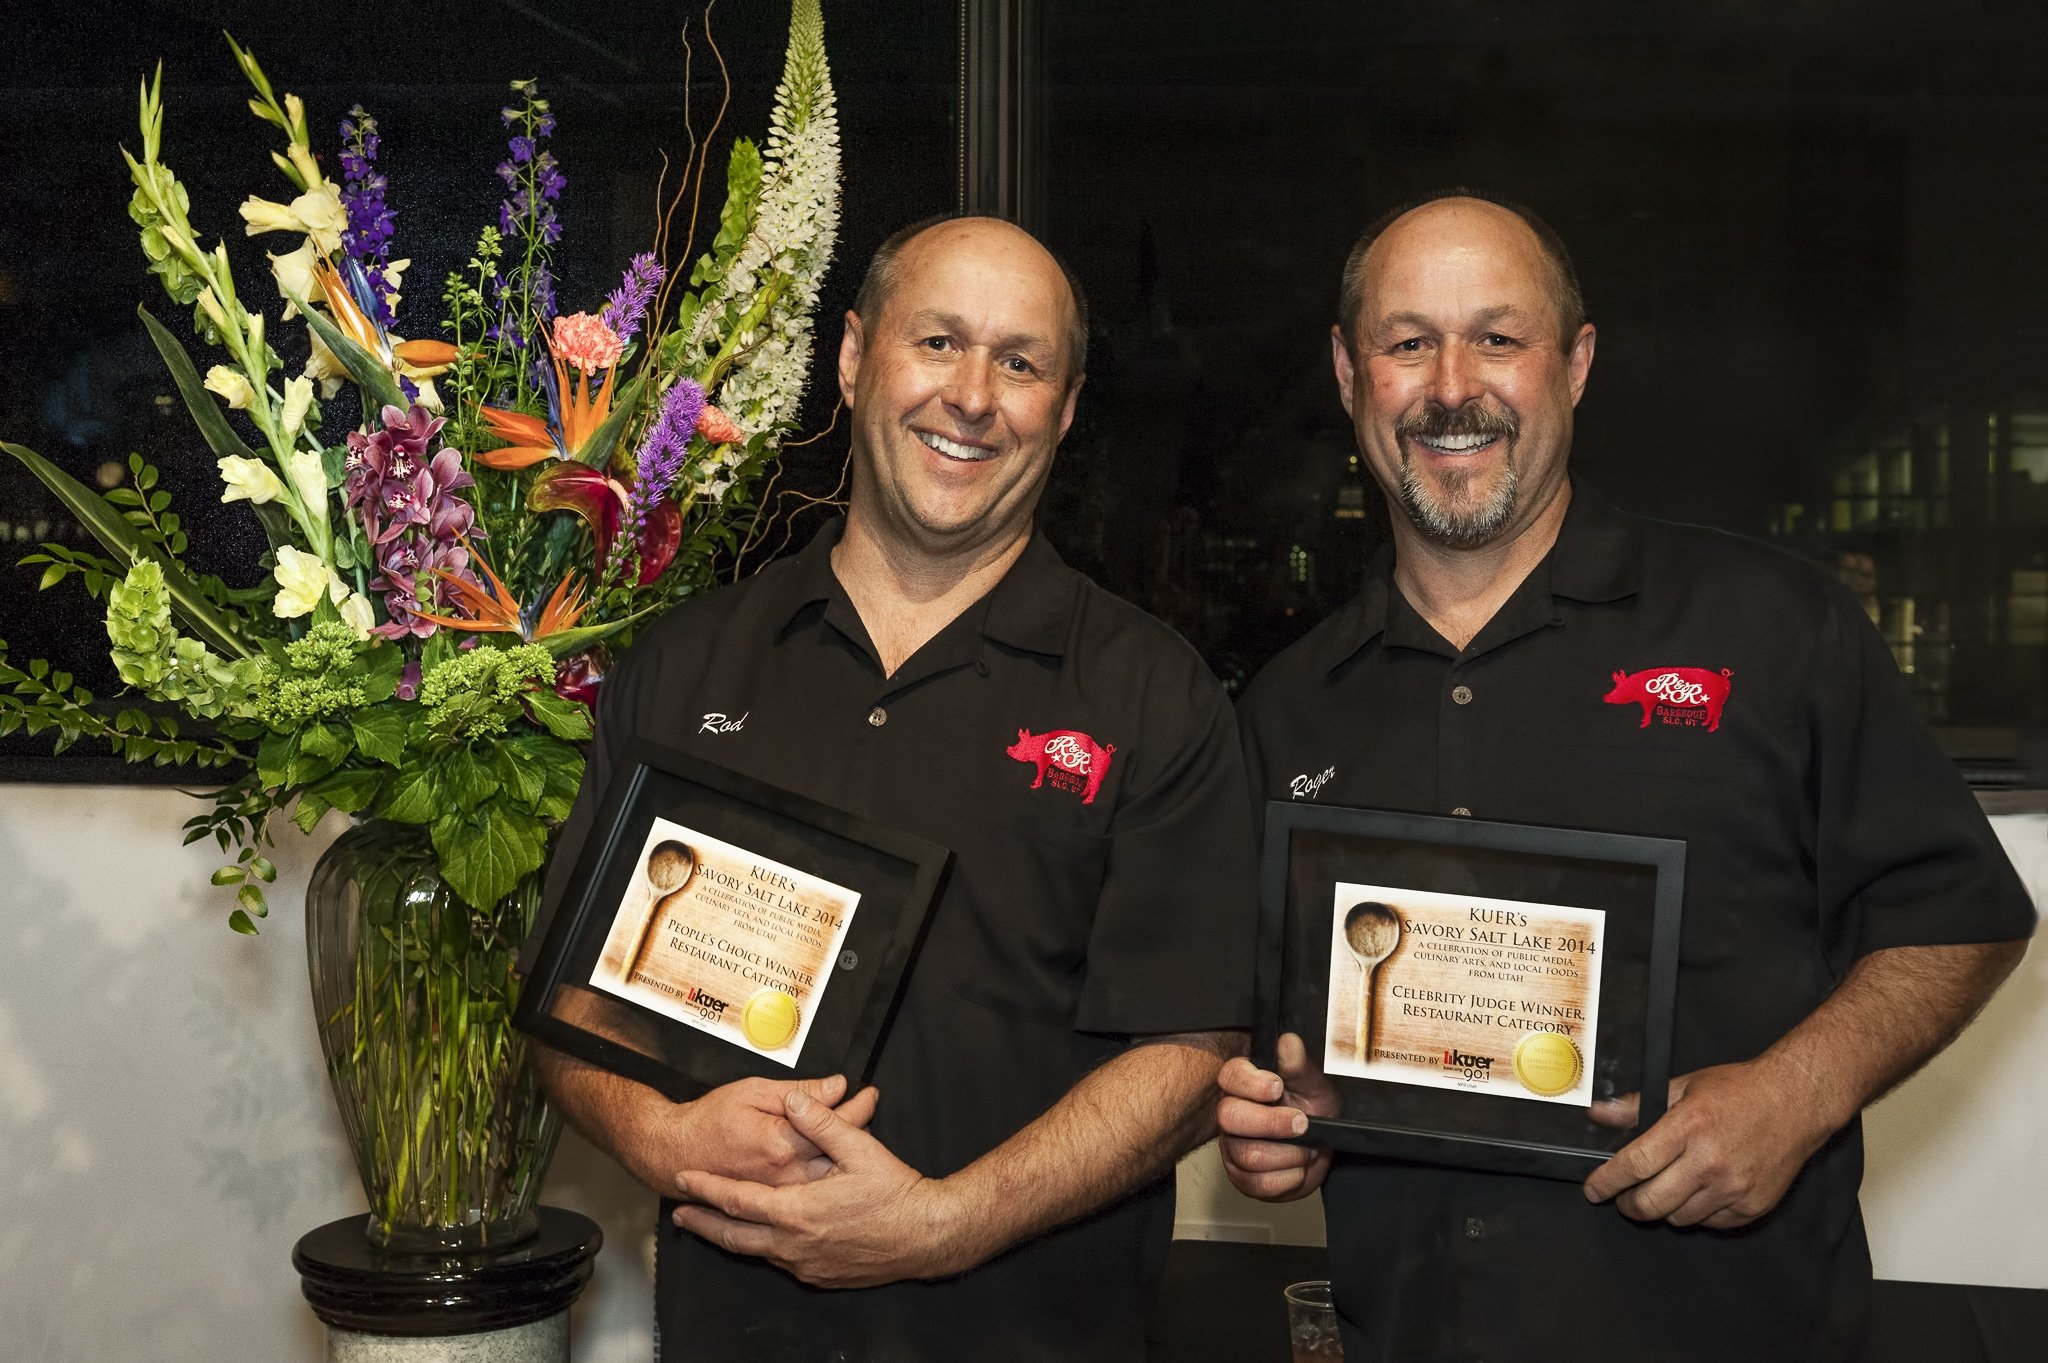 Proud winners of KUER's Savory Salt Lake, brothers Rod and Roger of R&R BBQ hold their awards for their quail egg-topped brisket.